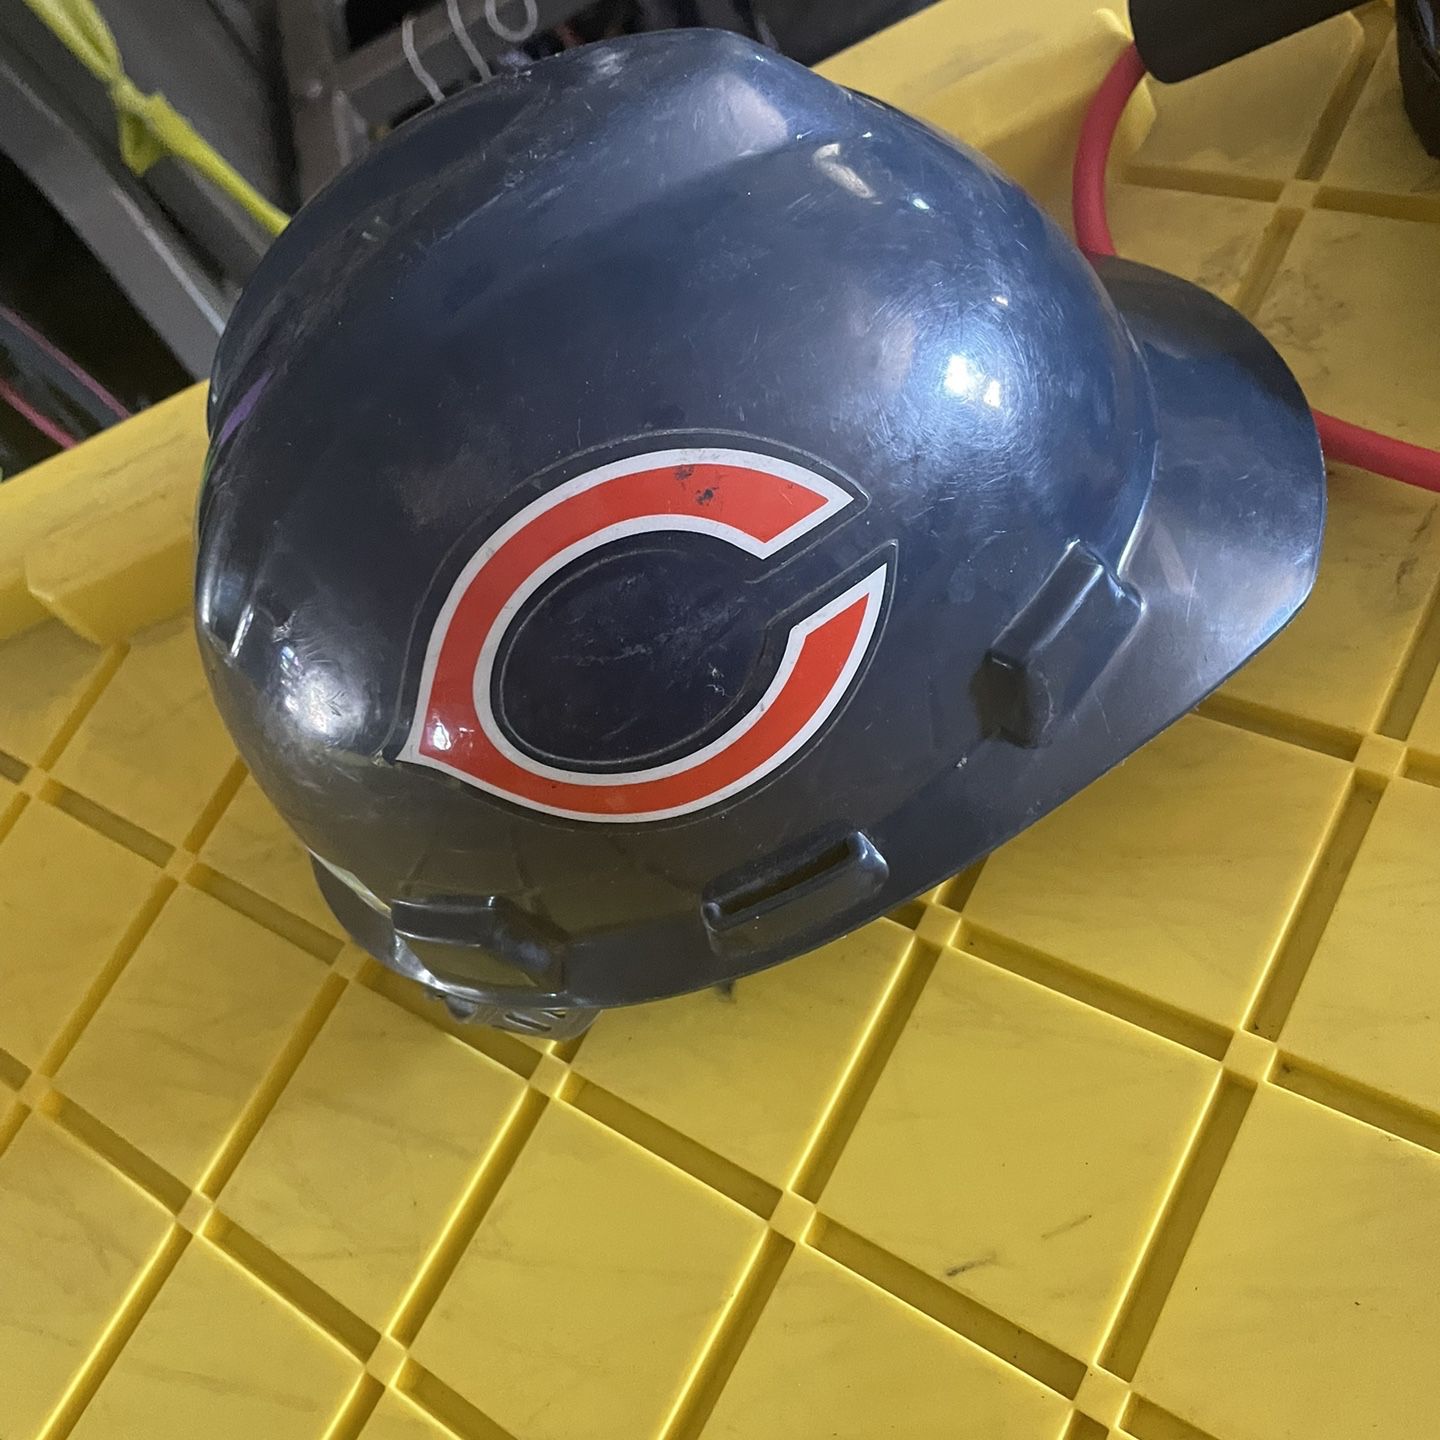 Chicago Bears Hard Hat for Sale in Placentia, CA - OfferUp